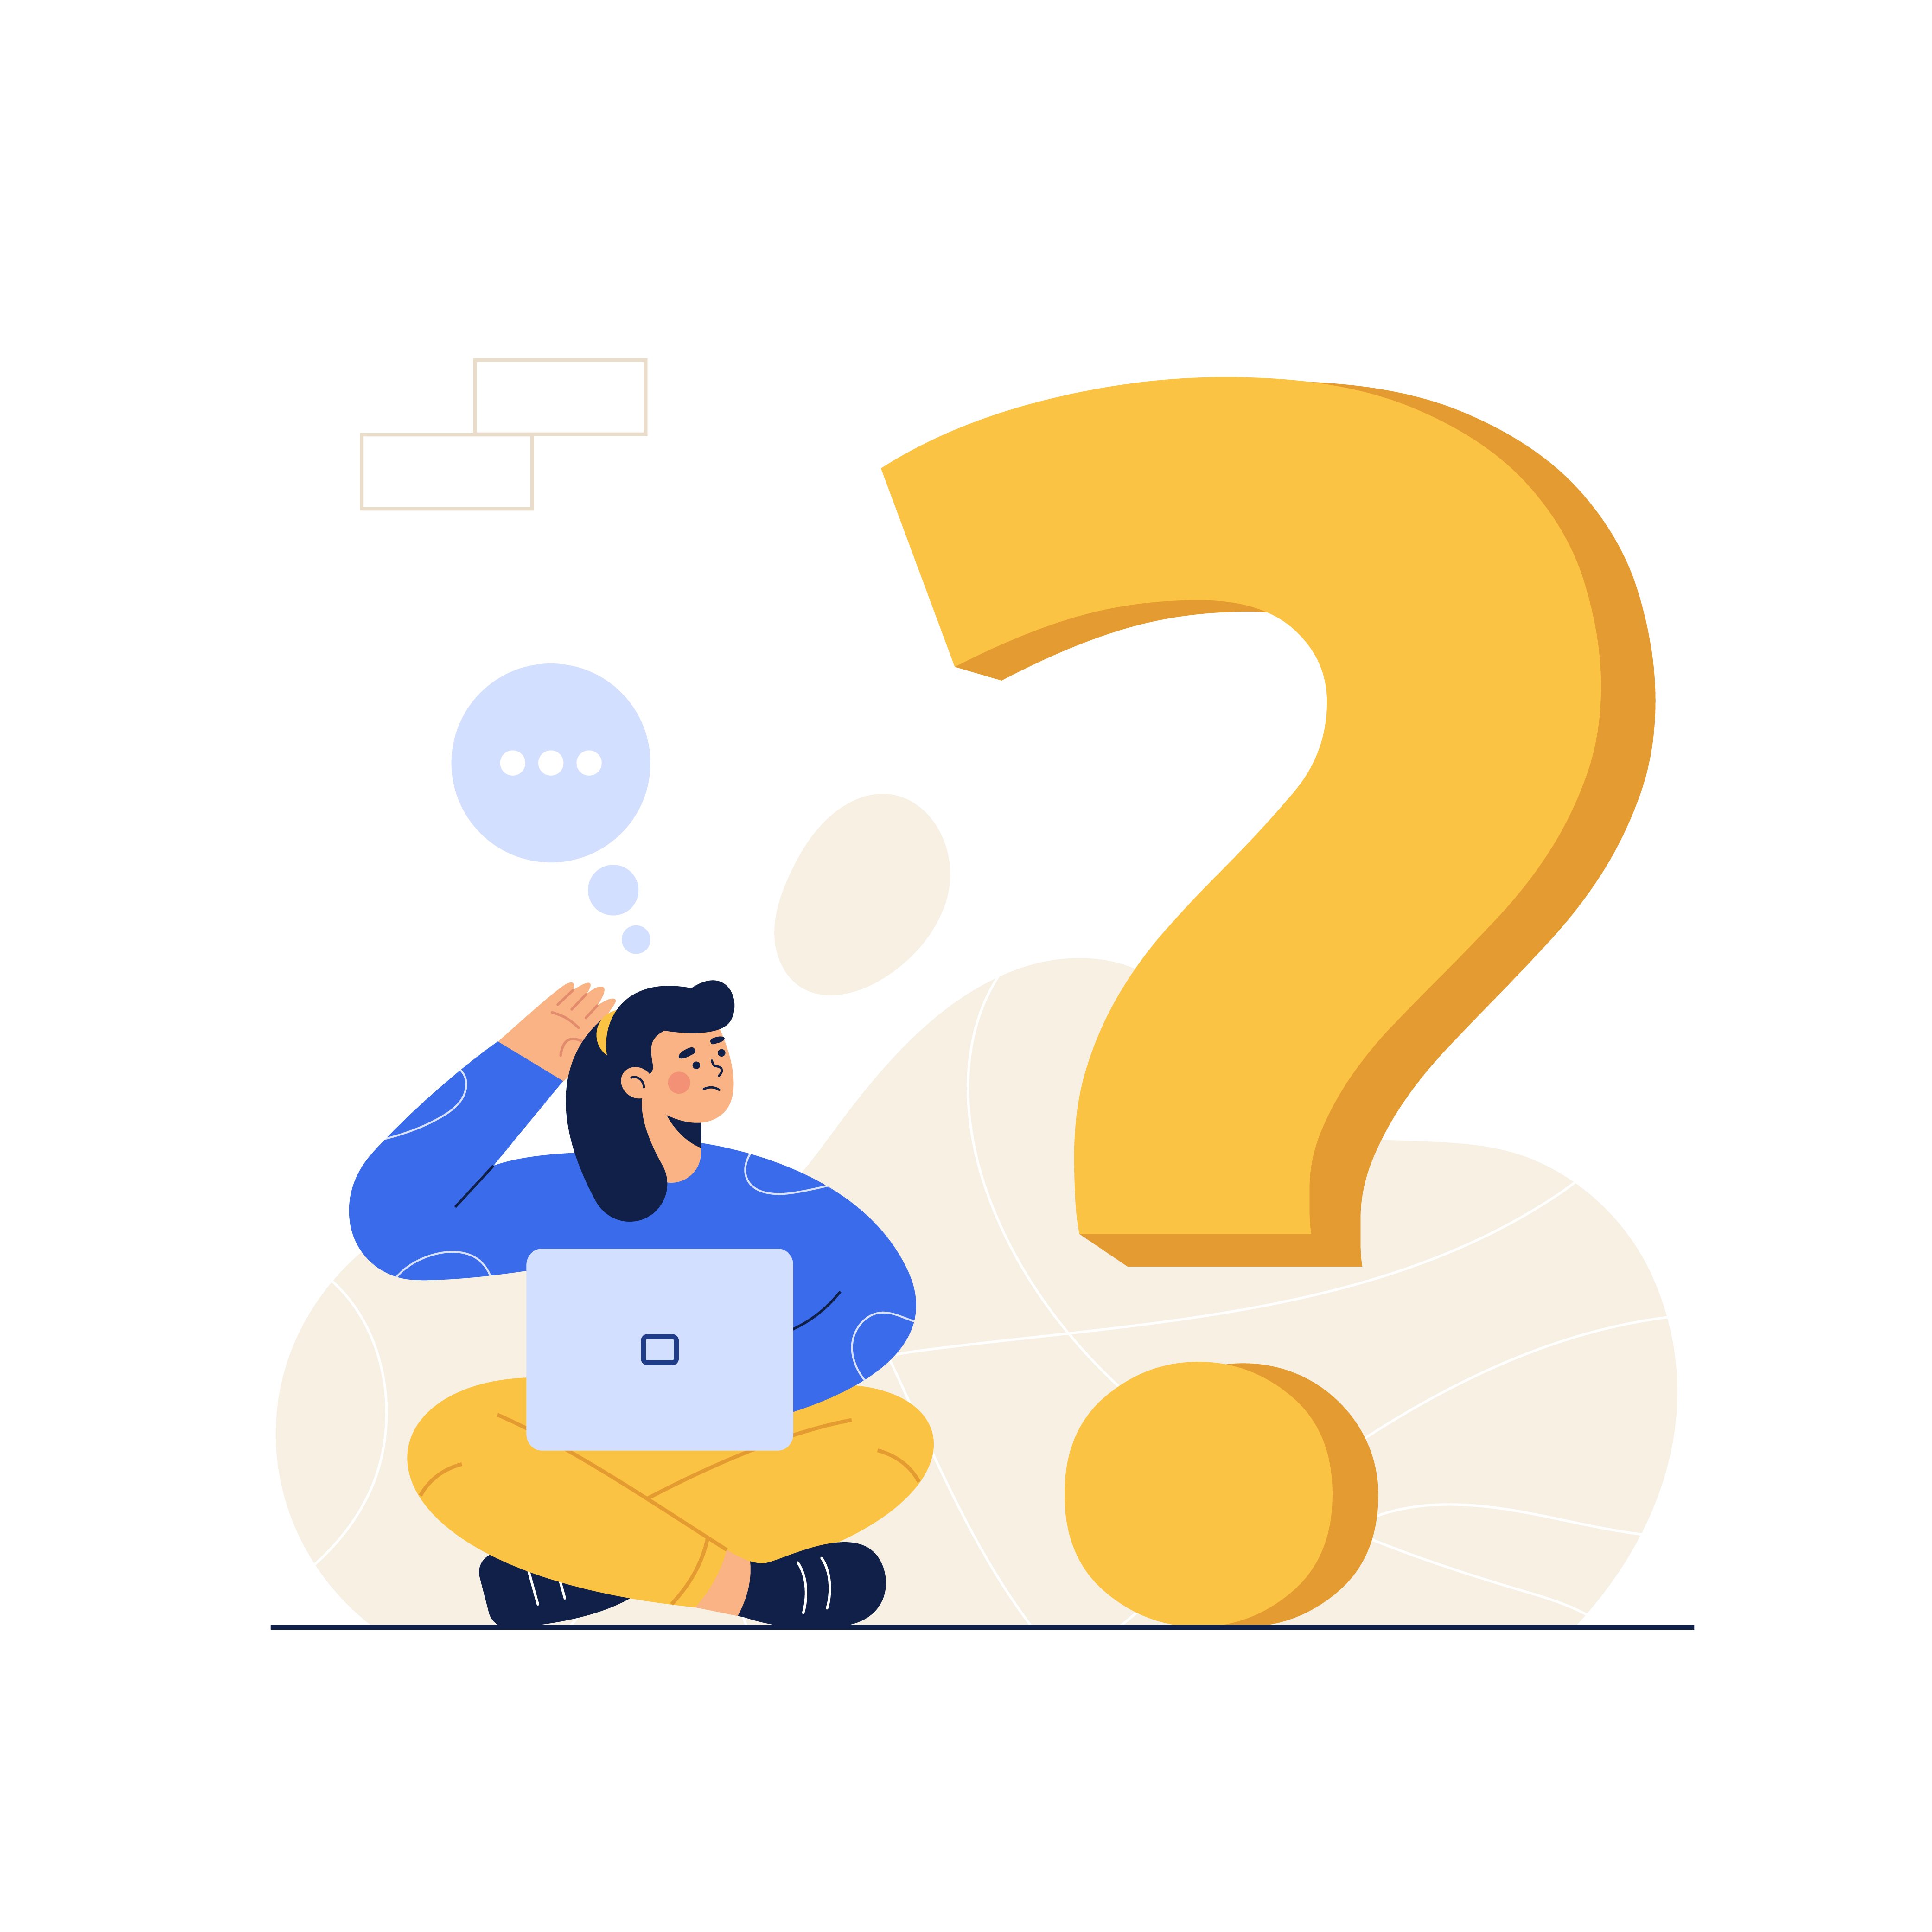 Illustration of frequently asked questions concept